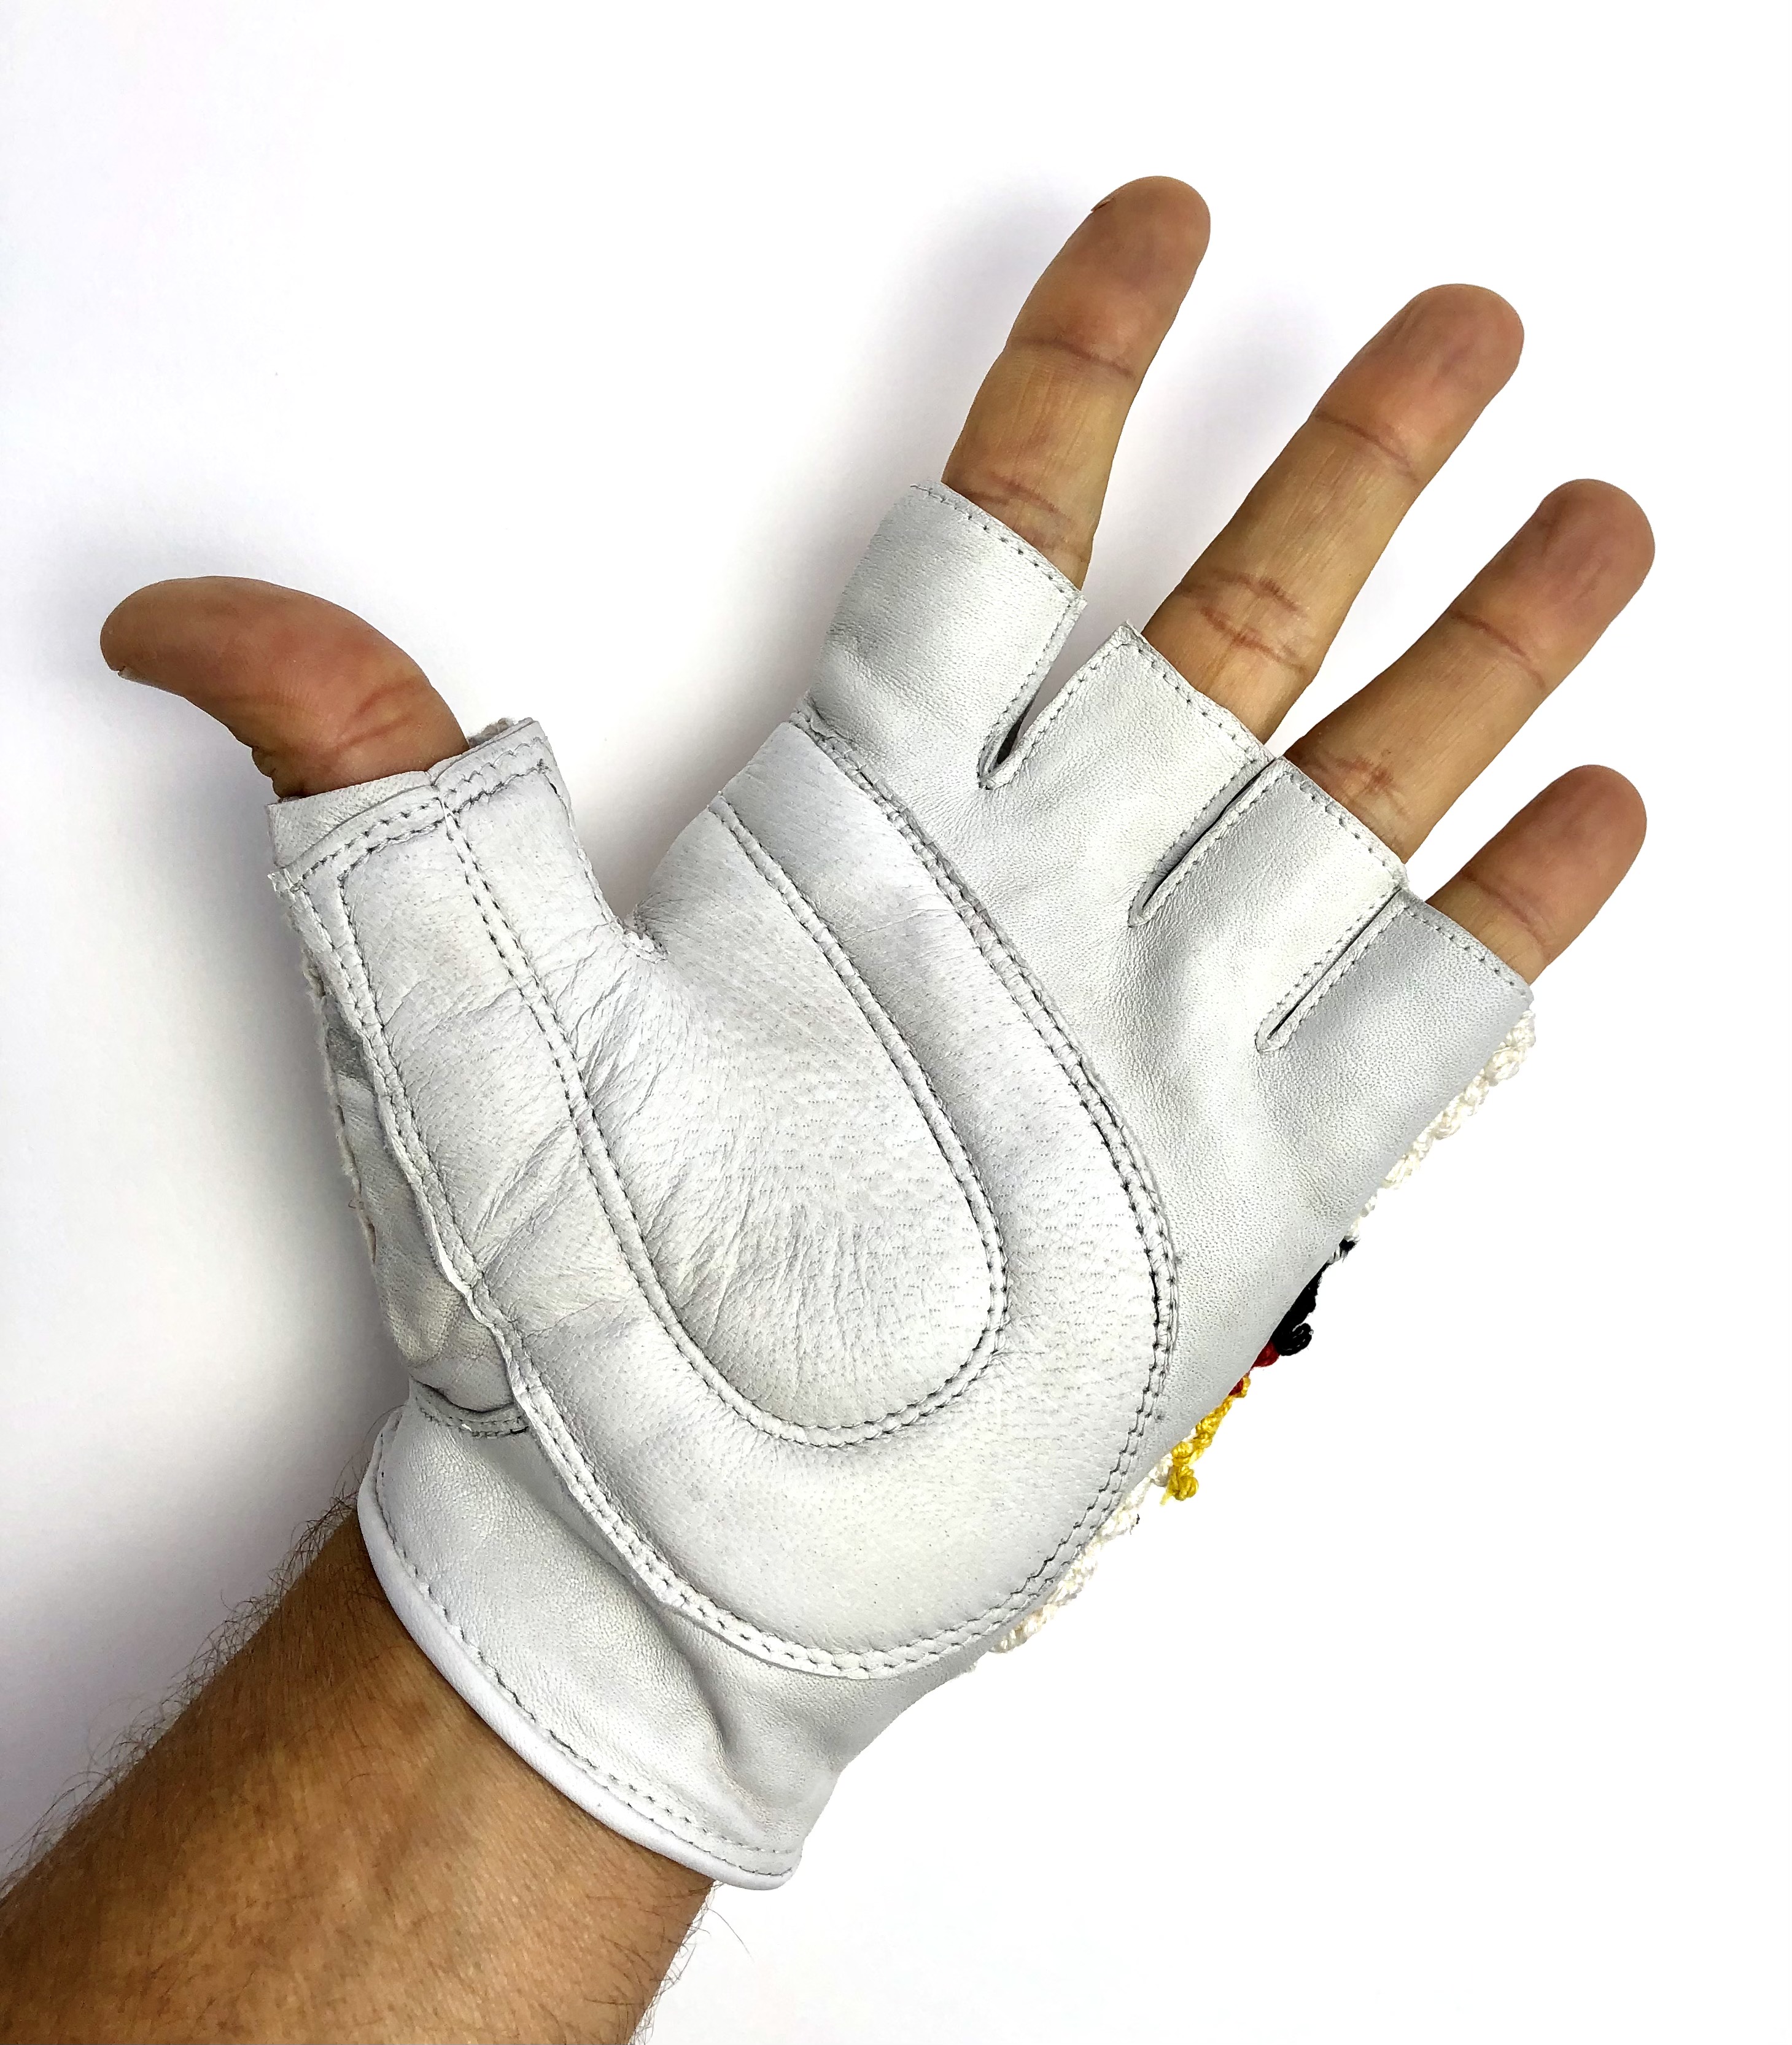 Original GANT 1970s vintage bicycle gloves with chrocheted upper hand Size 10